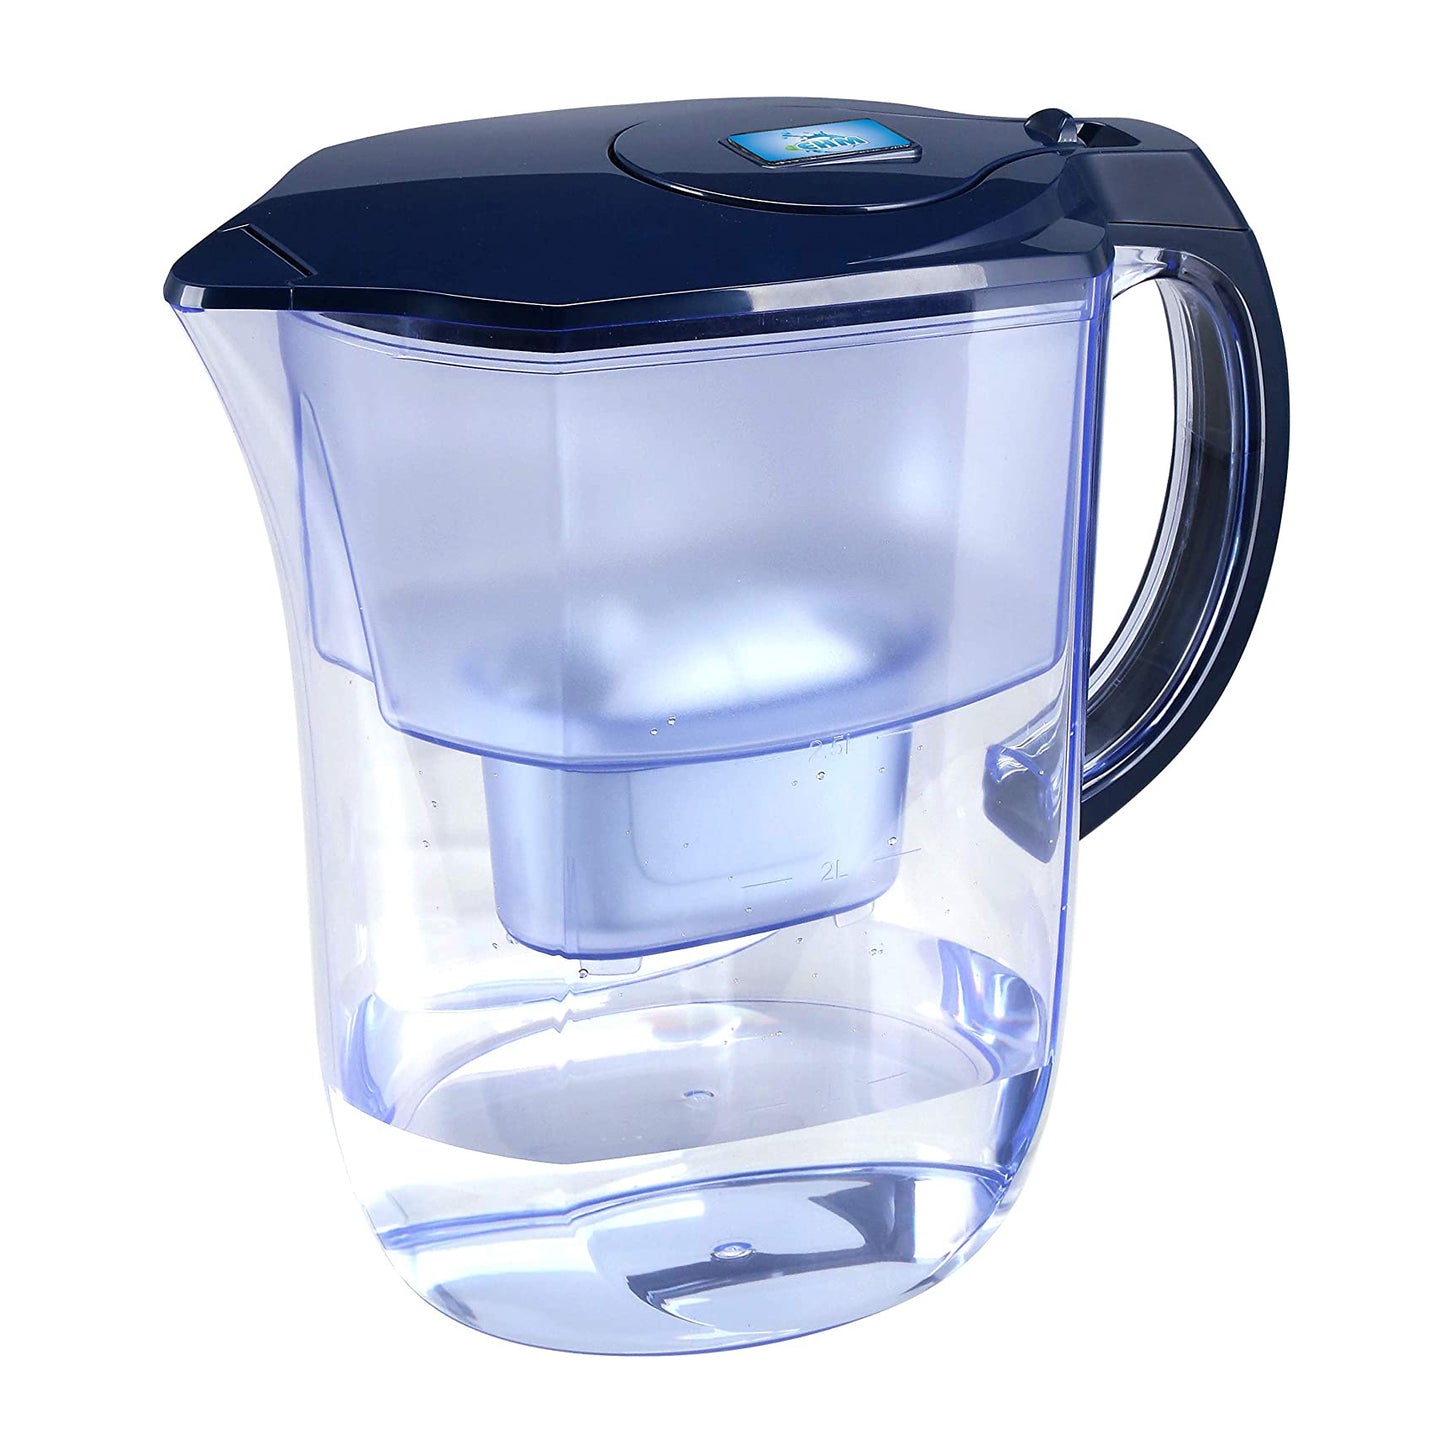 Ehm Ultra Premium Alkaline water Filter Pitcher - 3.8L, Activated Carbon Filter- BPA Free